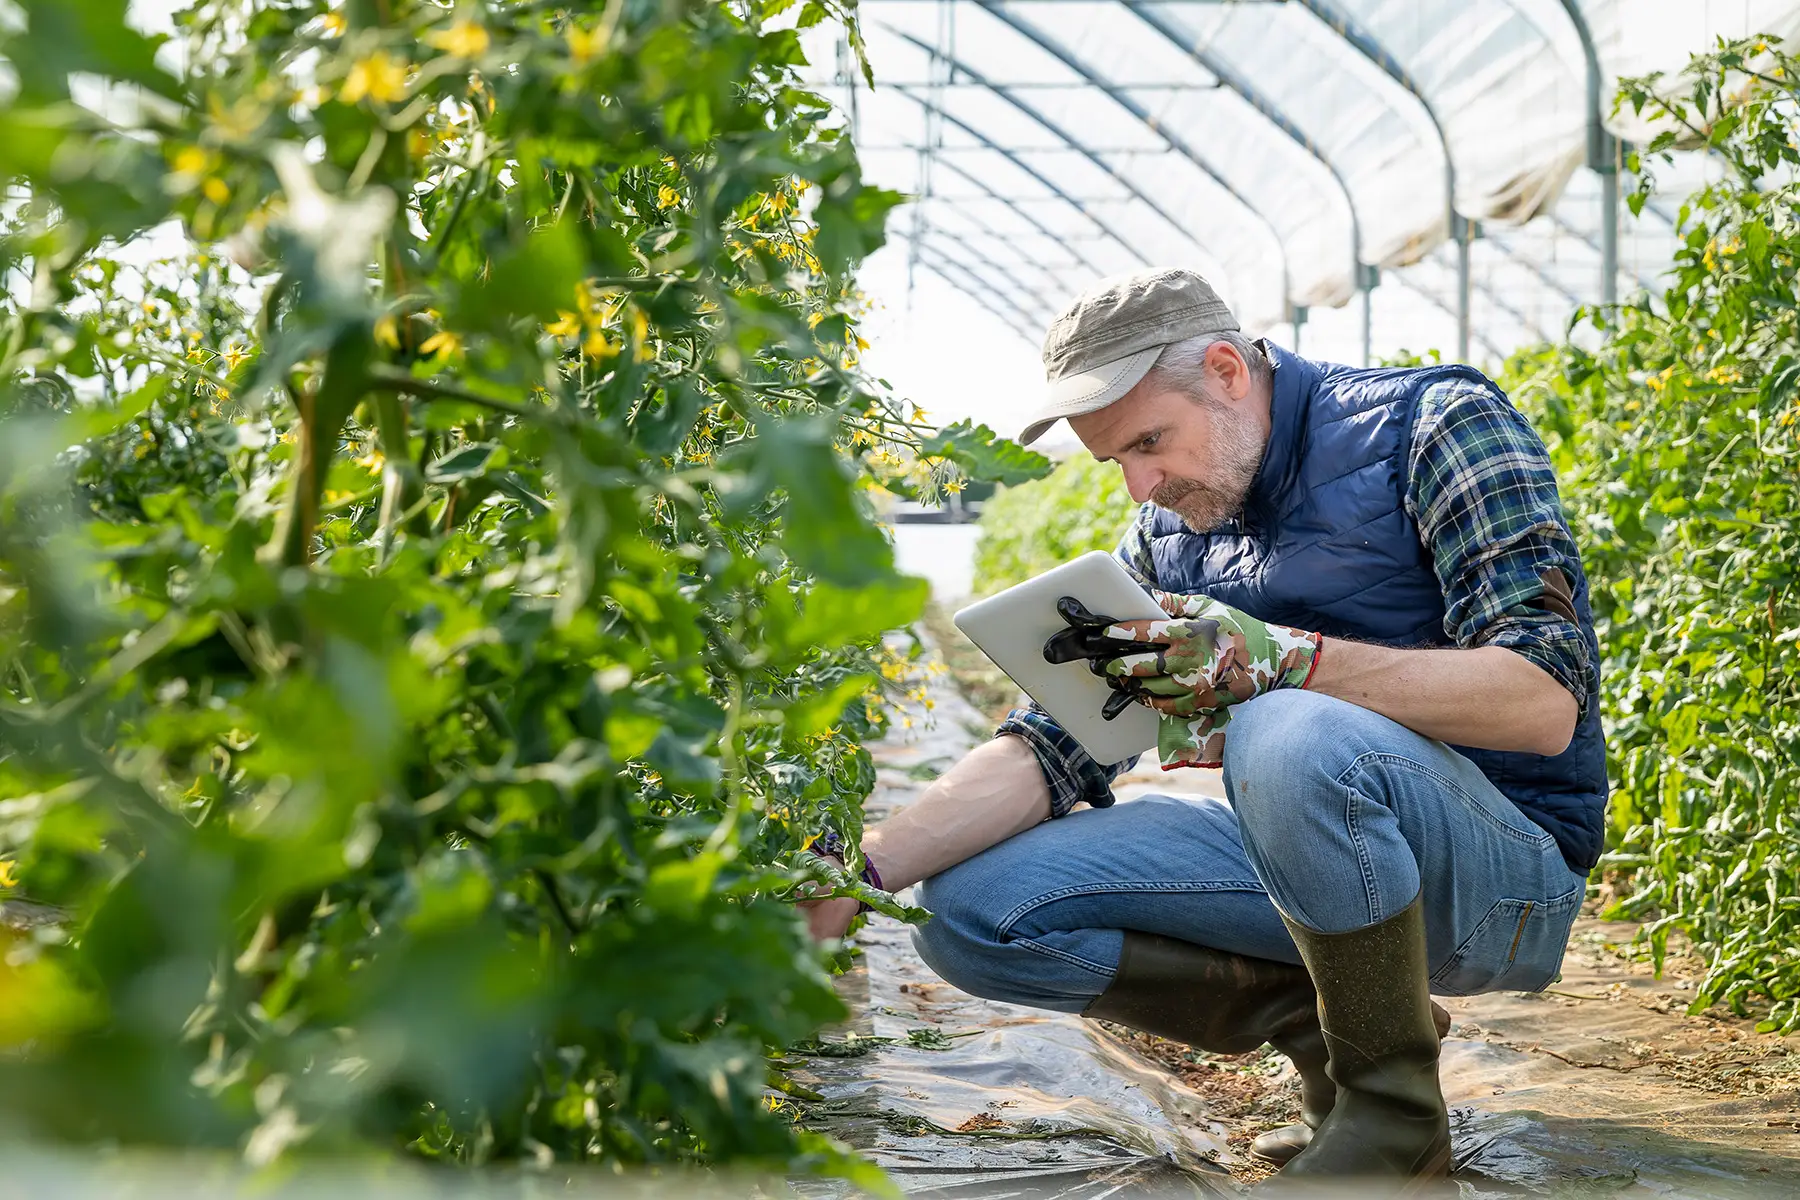 A man with a tablet crouching down to observe tomato plants